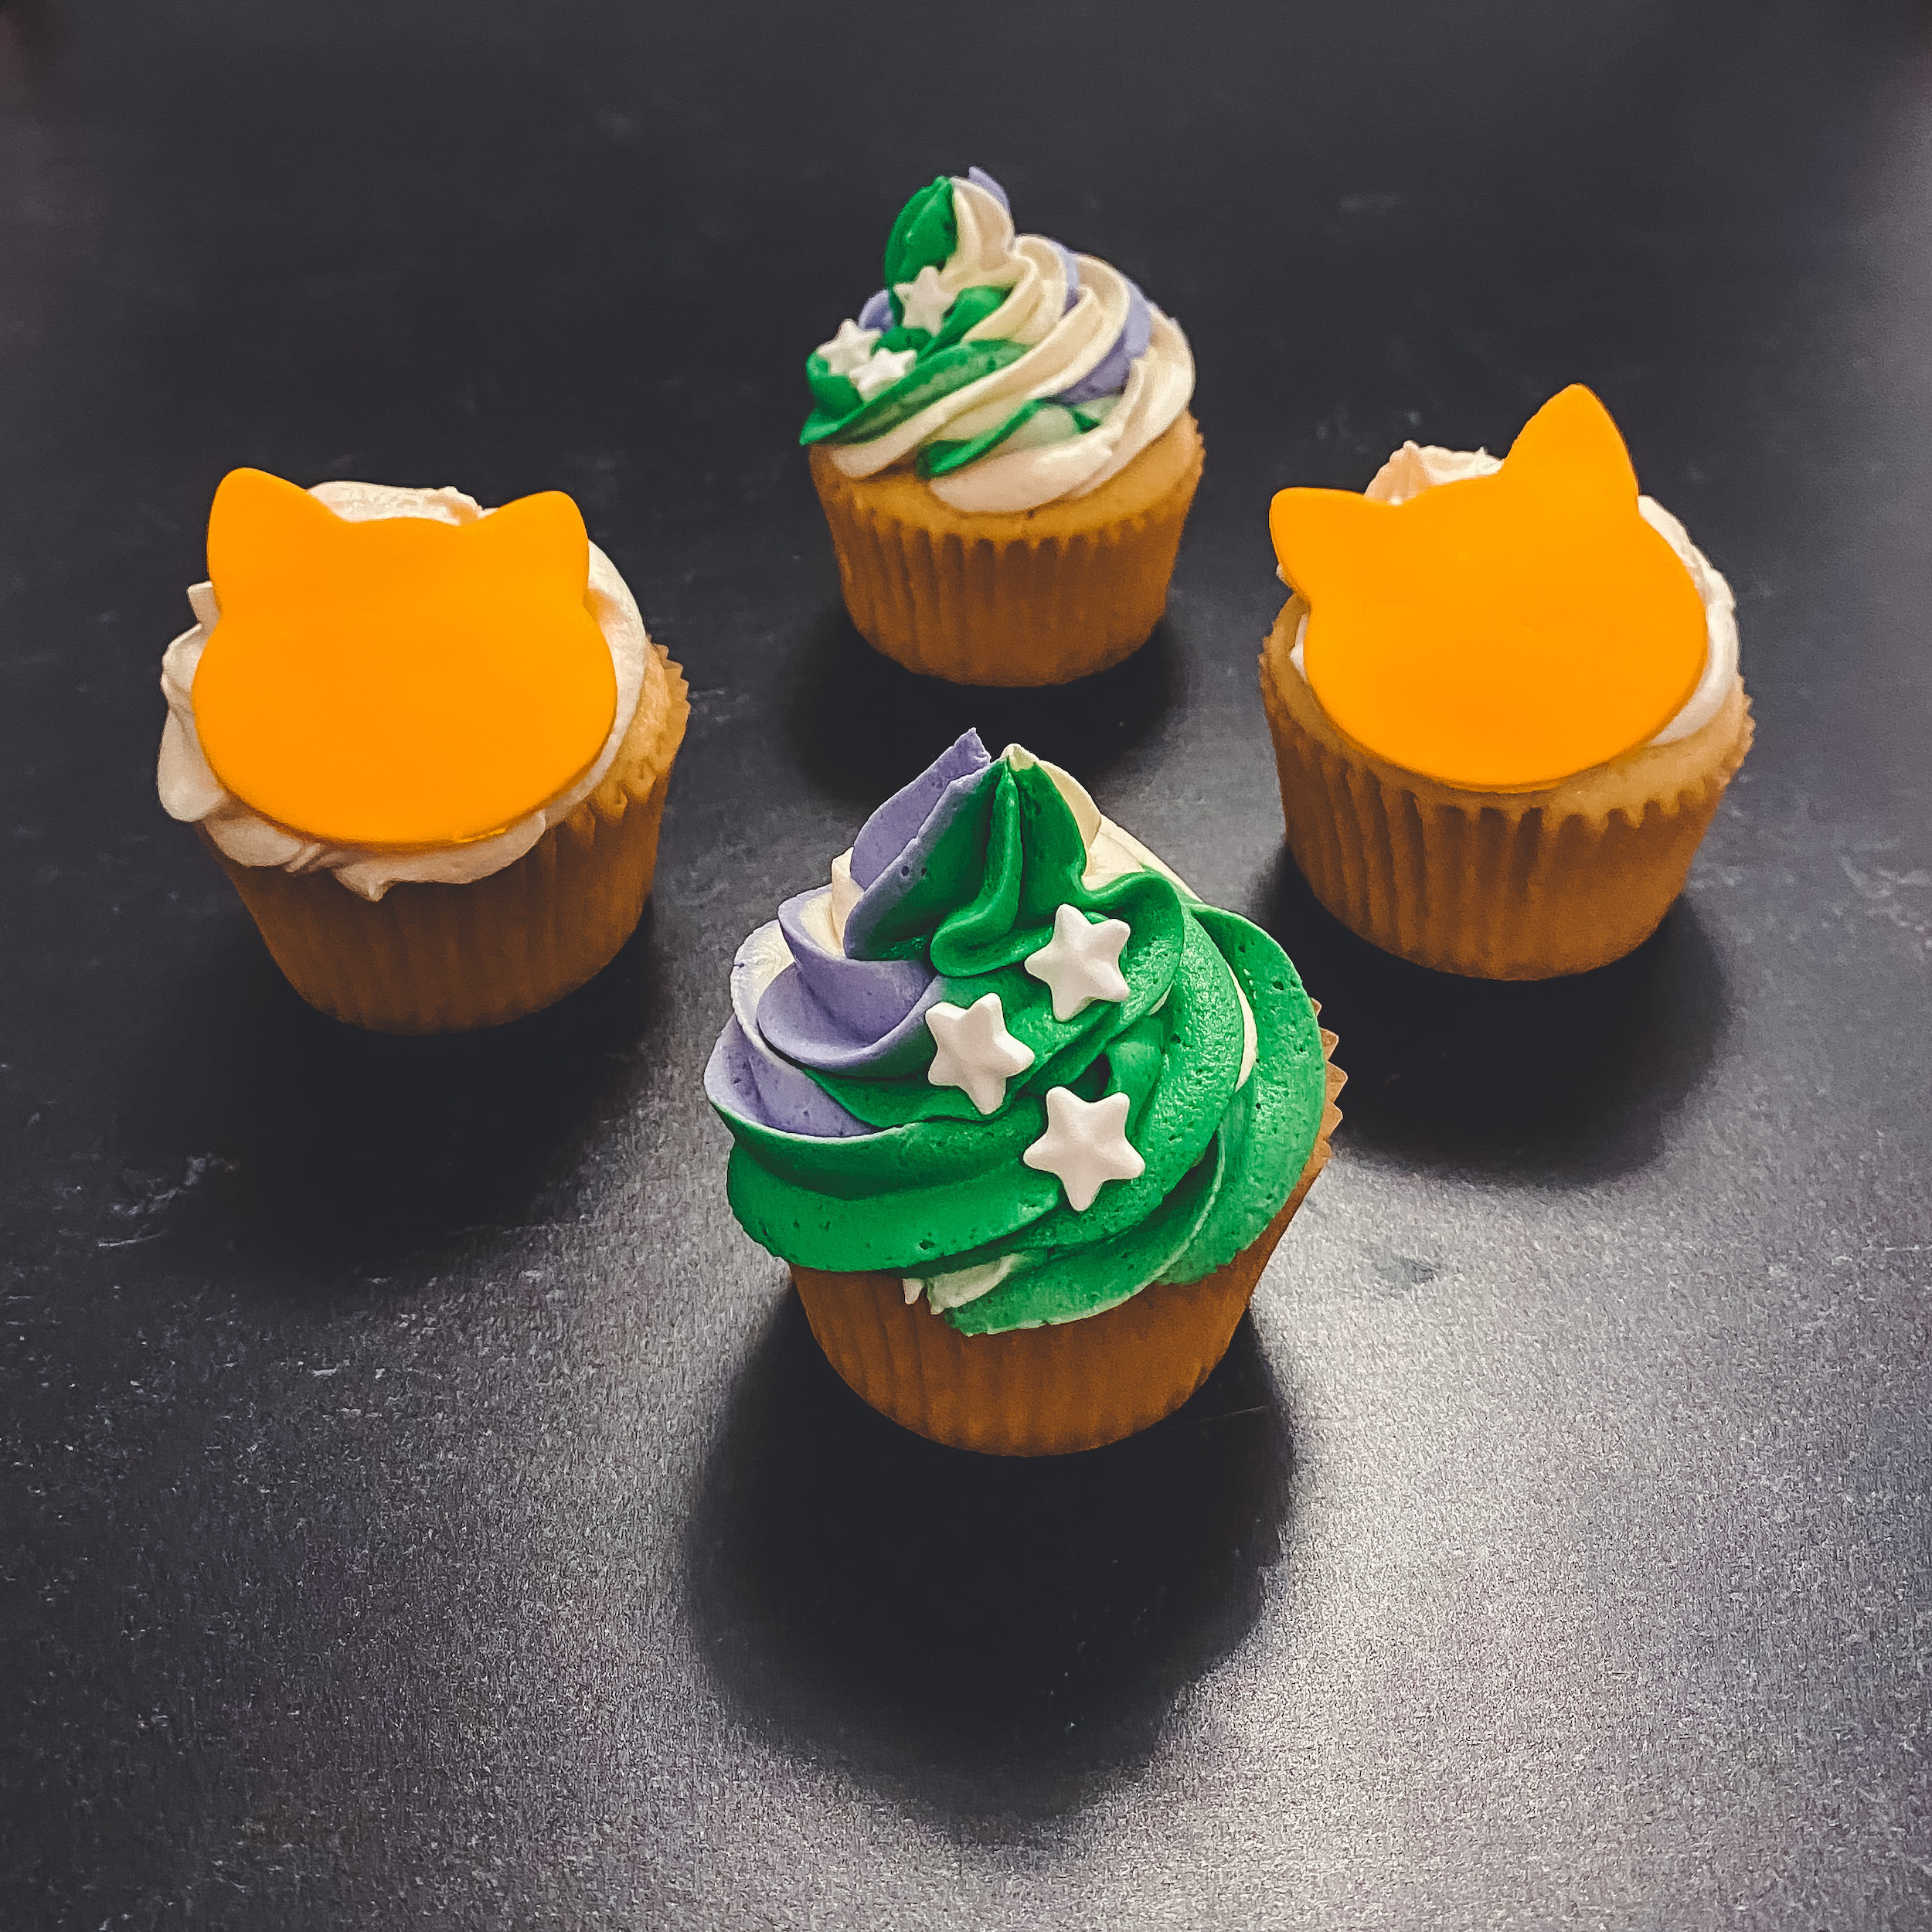 Lightyear Cupcakes (vanilla cupcakes with a swirl of green, purple, and white frosting with candy stars and vanilla cupcakes with white frosting and an orange fondant cat decoration)